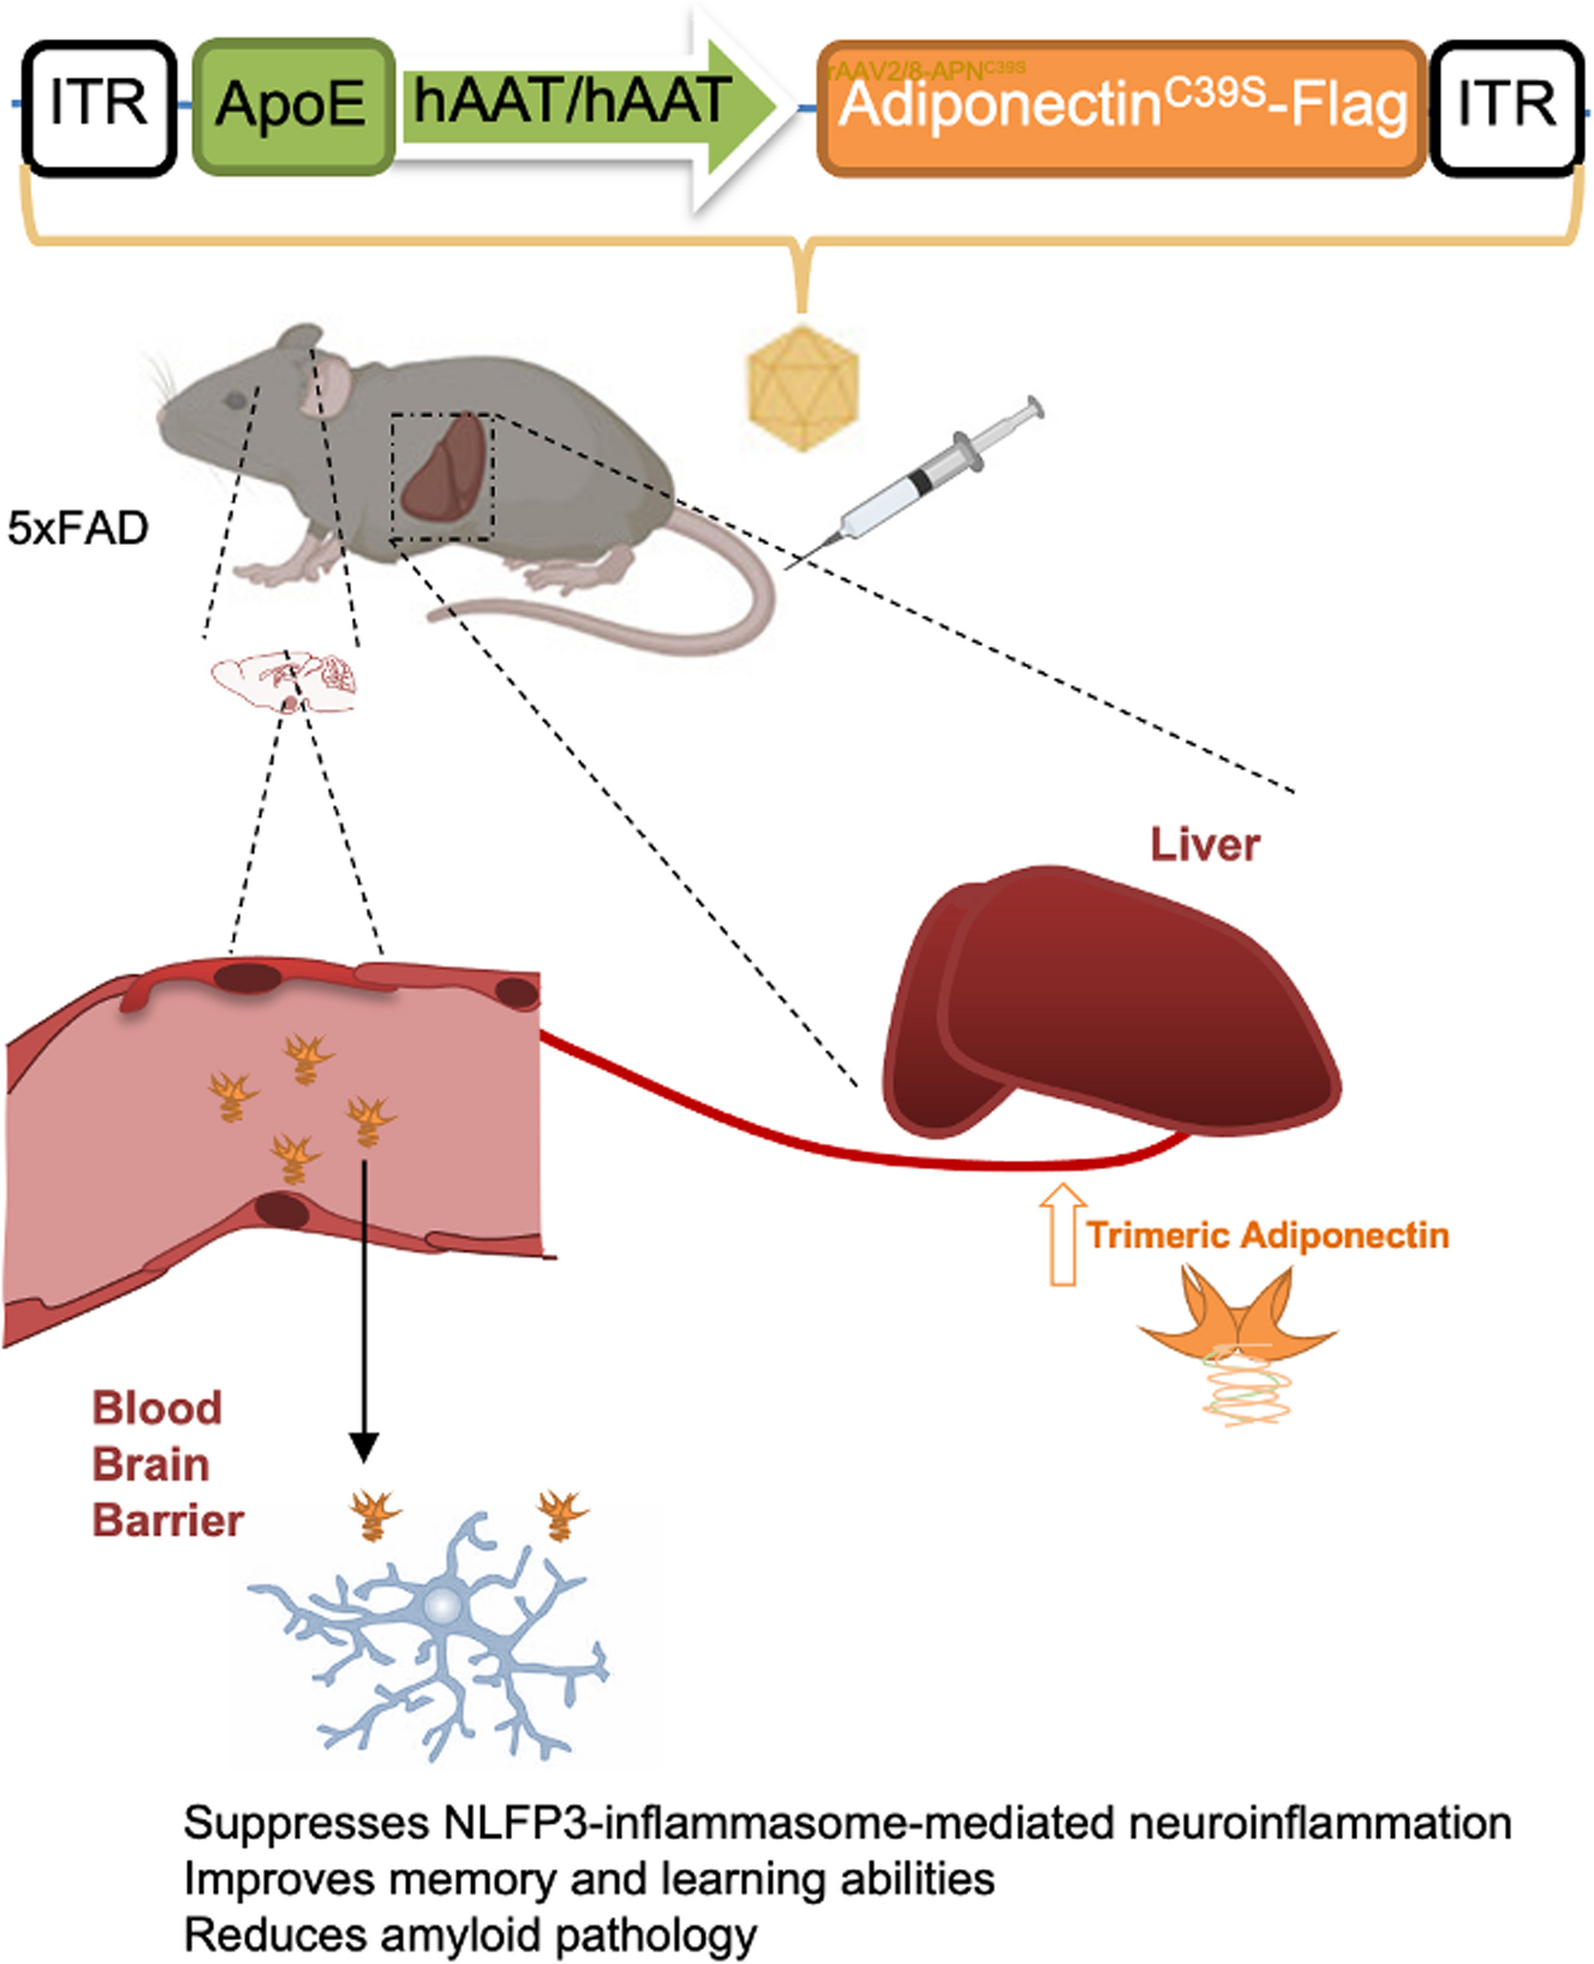 Liver-specific adiponectin gene therapy suppresses microglial NLRP3-inflammasome activation for treating Alzheimer’s disease